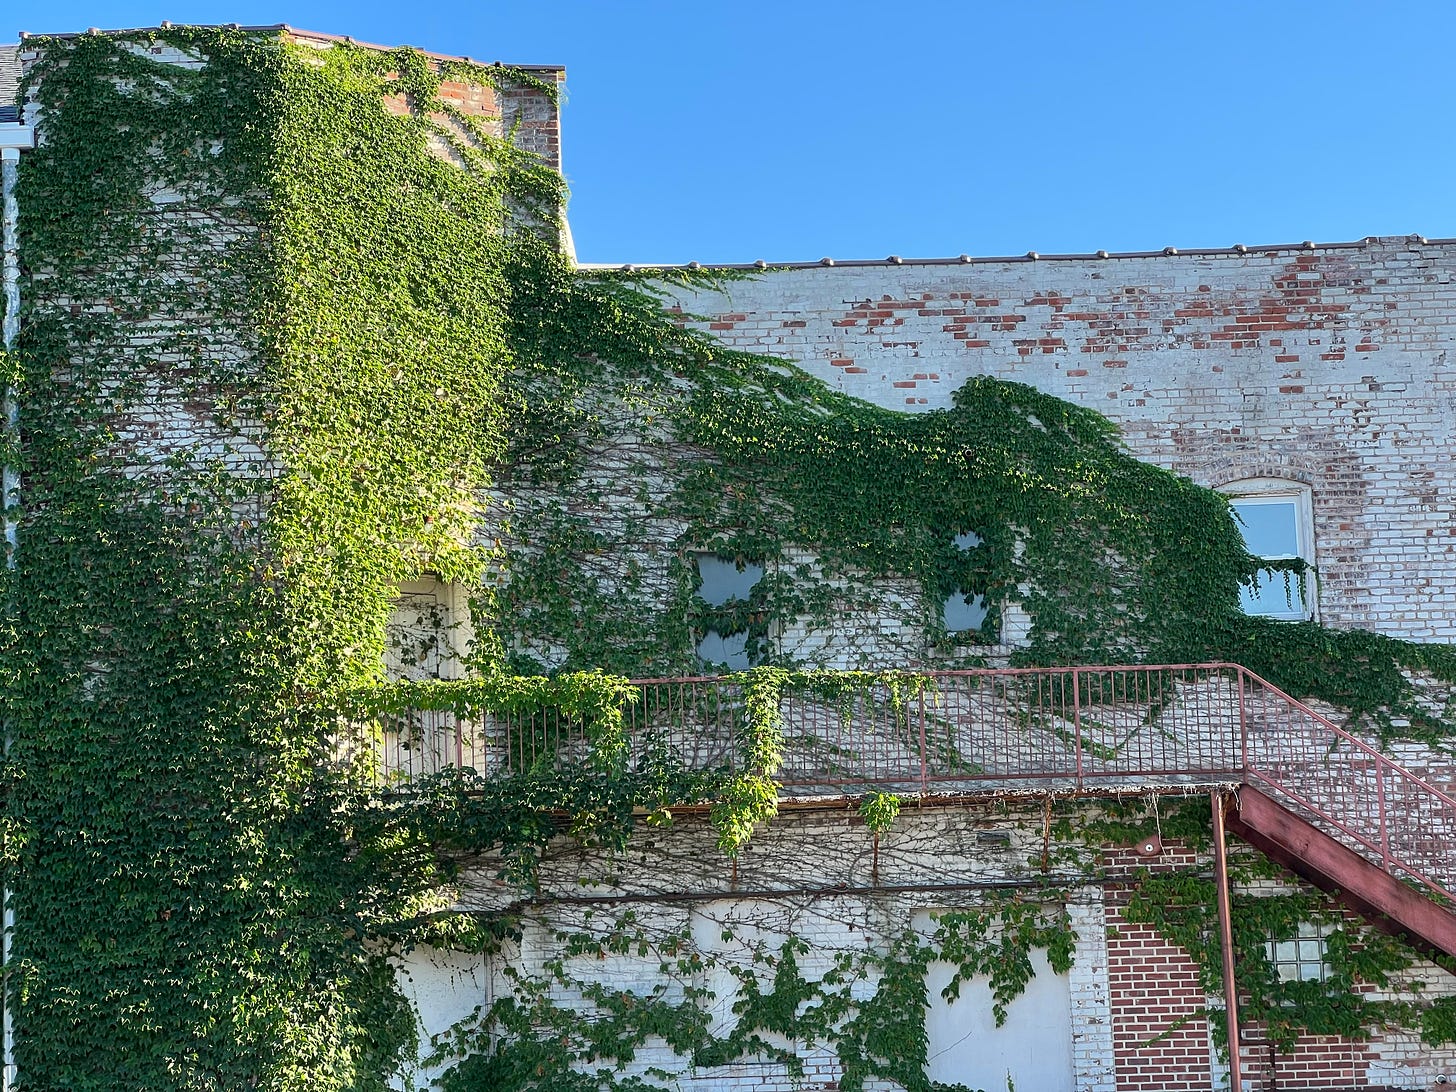 An old brick building covered in ivy against a very blue sky